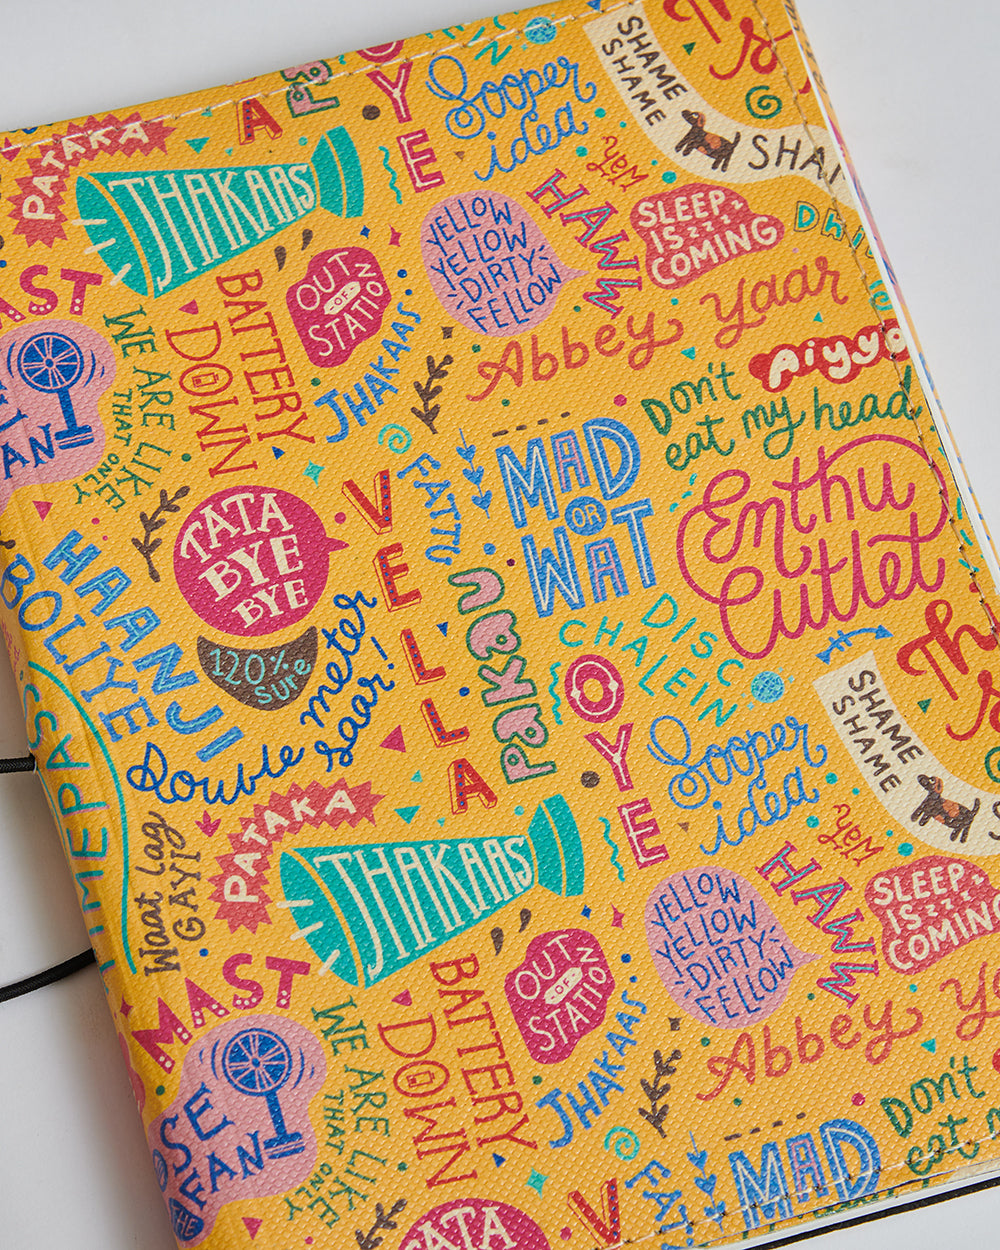 Chumbak's 'Things Indians Say' Journal